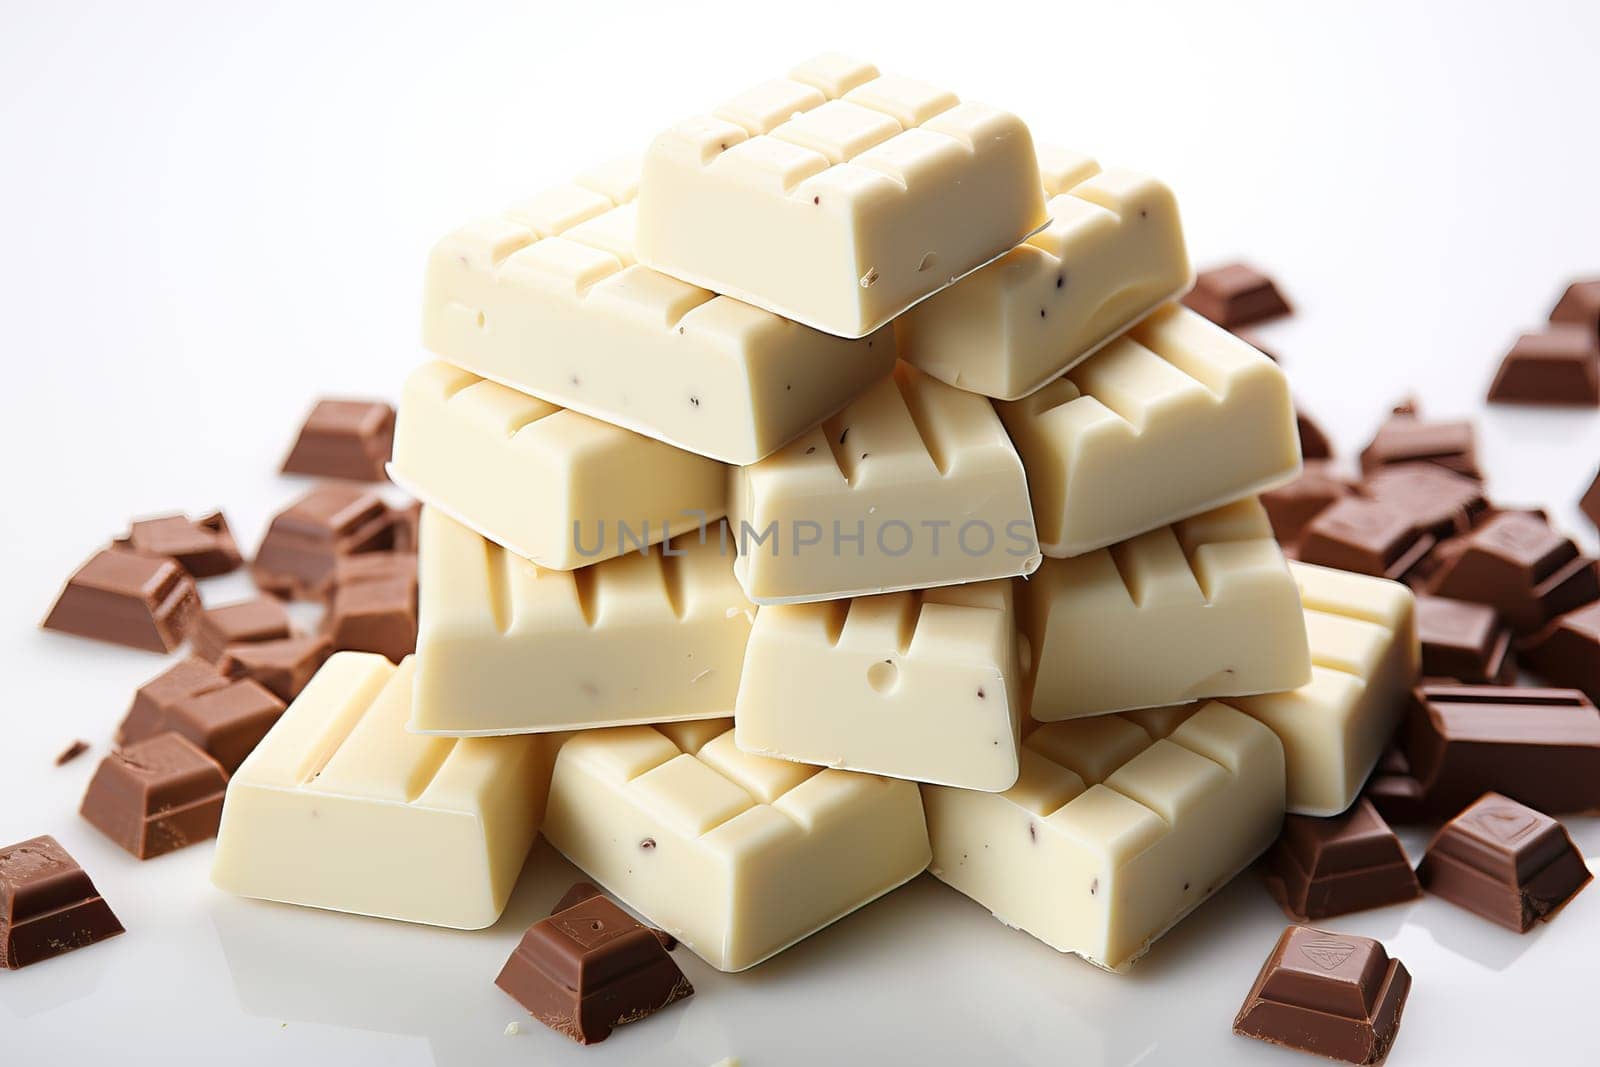 Bars of dark and white chocolate together close up, advertising chocolate.